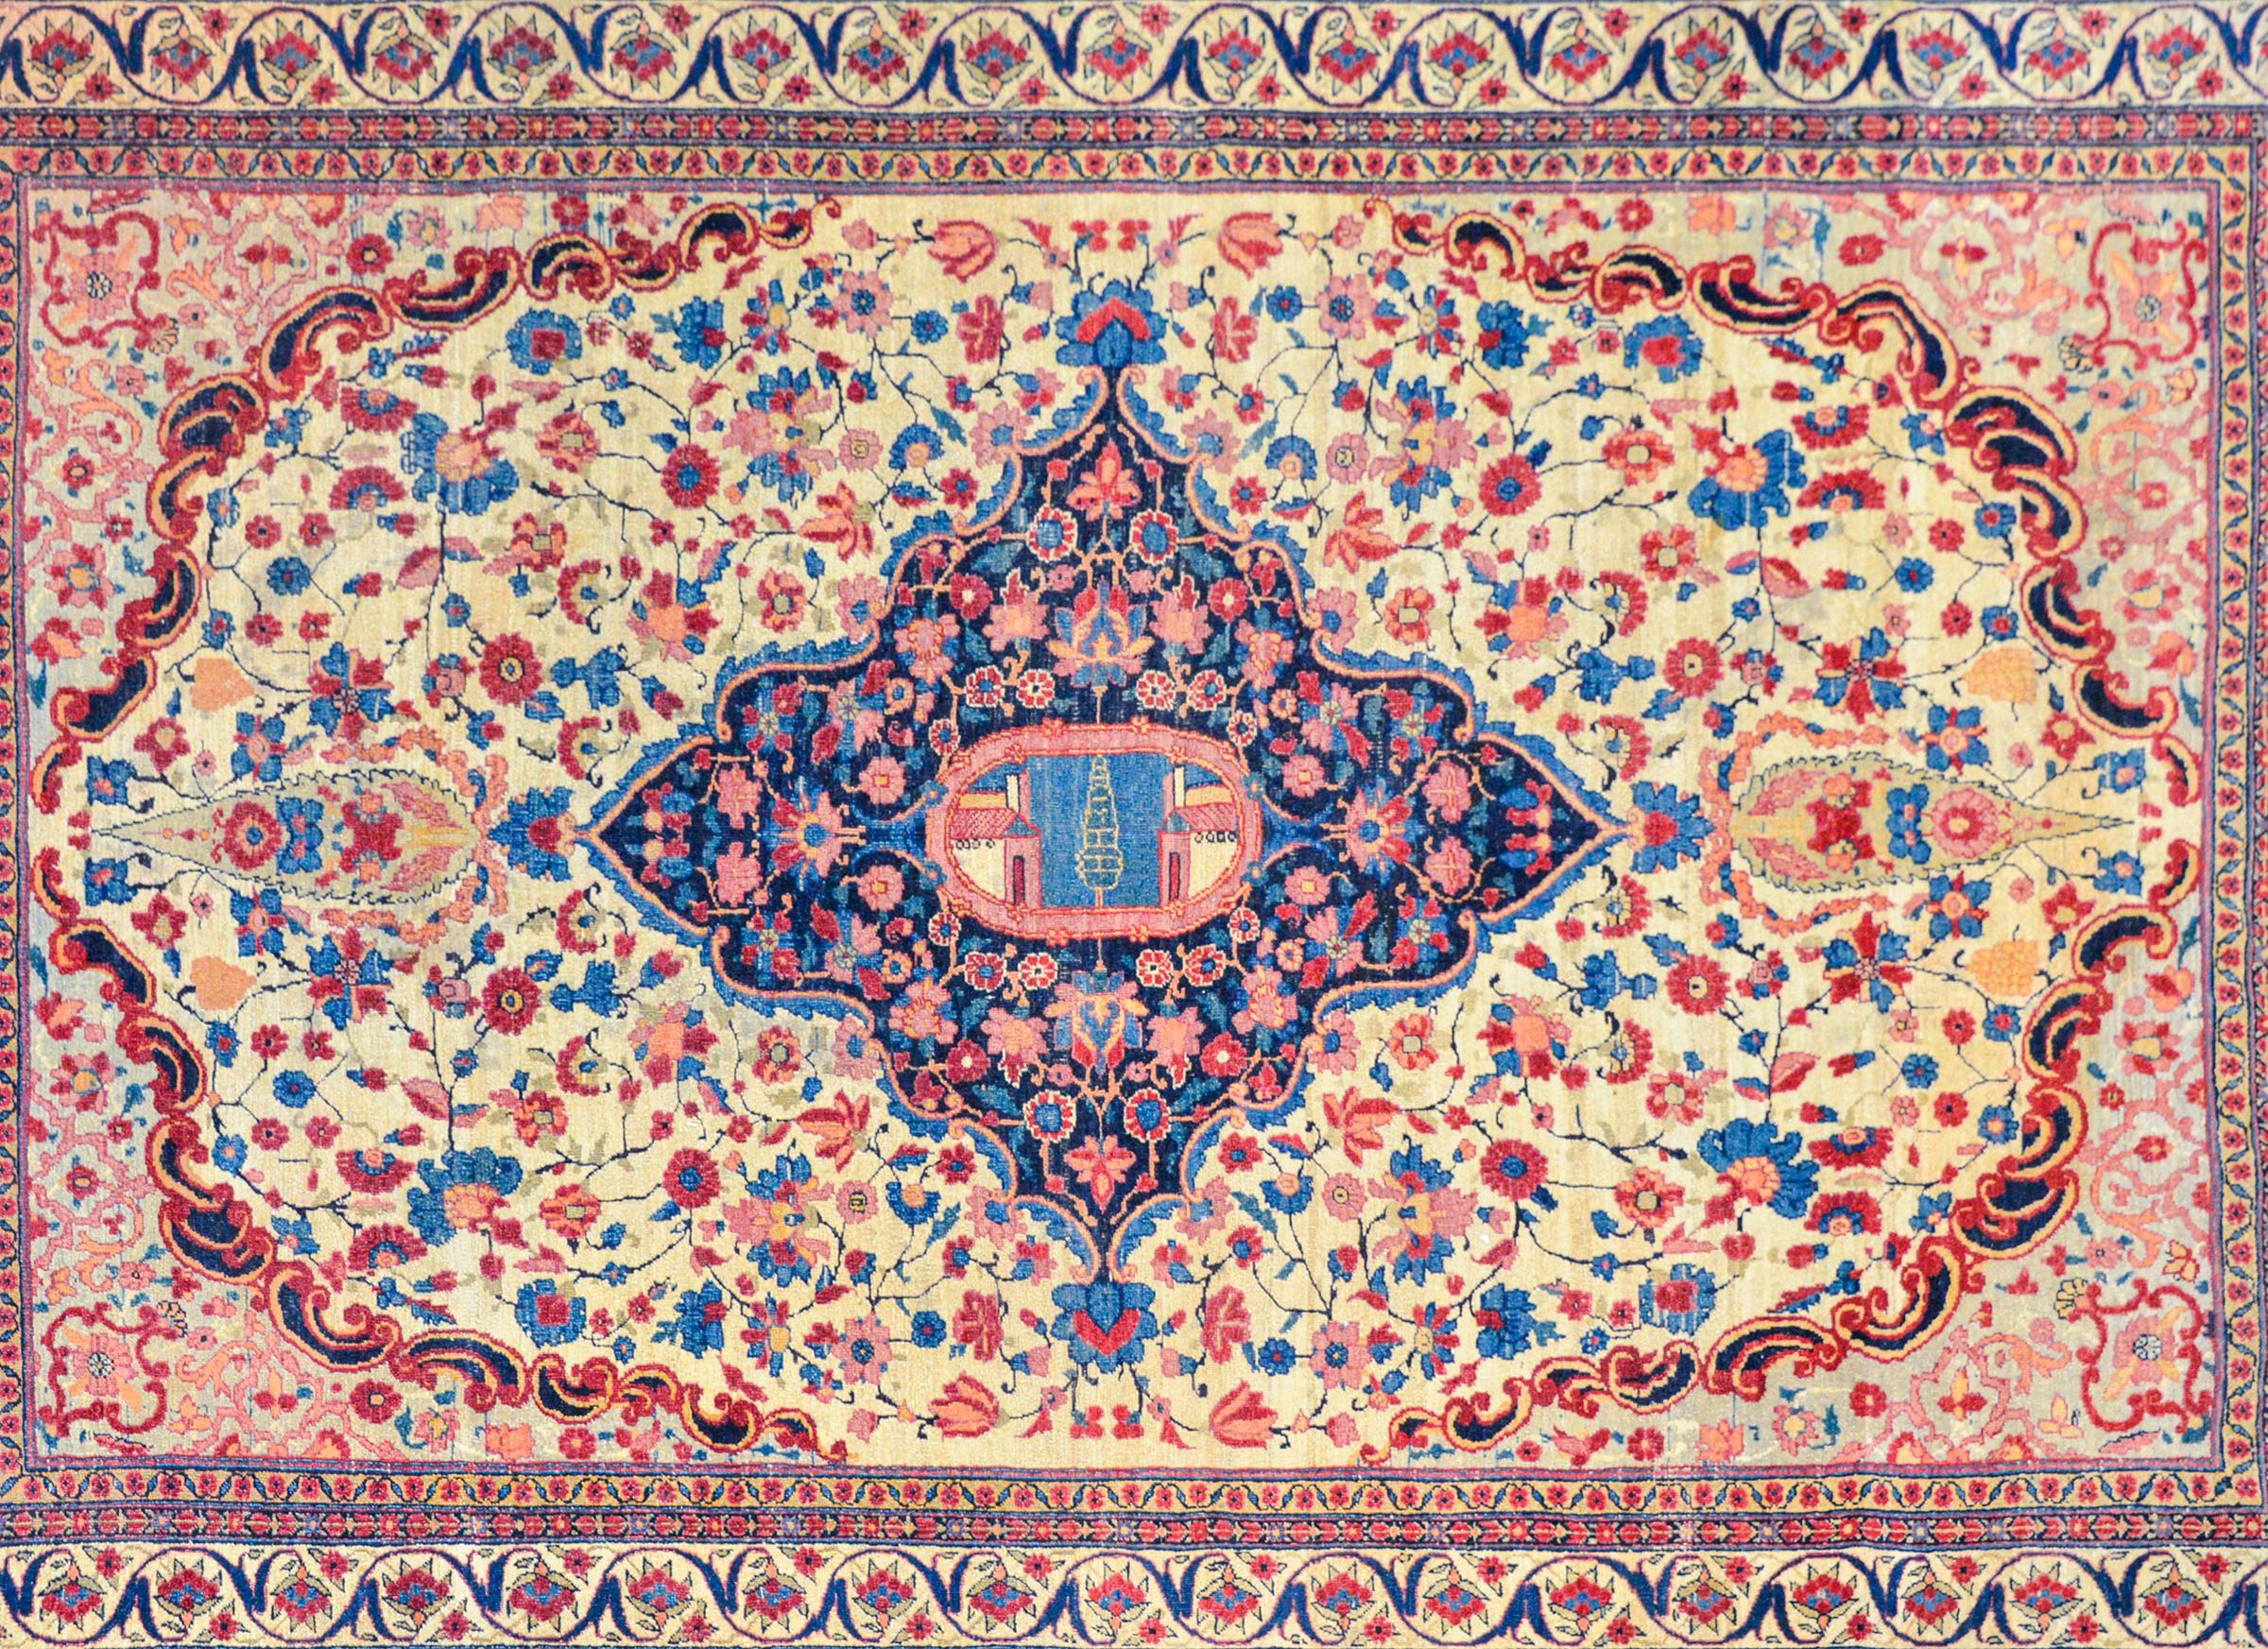 A special early 20th century Persian Tabriz rug with a central medallion woven with flowers and scrolling vines against a dark indigo background and a central image depicting two buildings flanking a central cypress tree. The medallion lives amidst